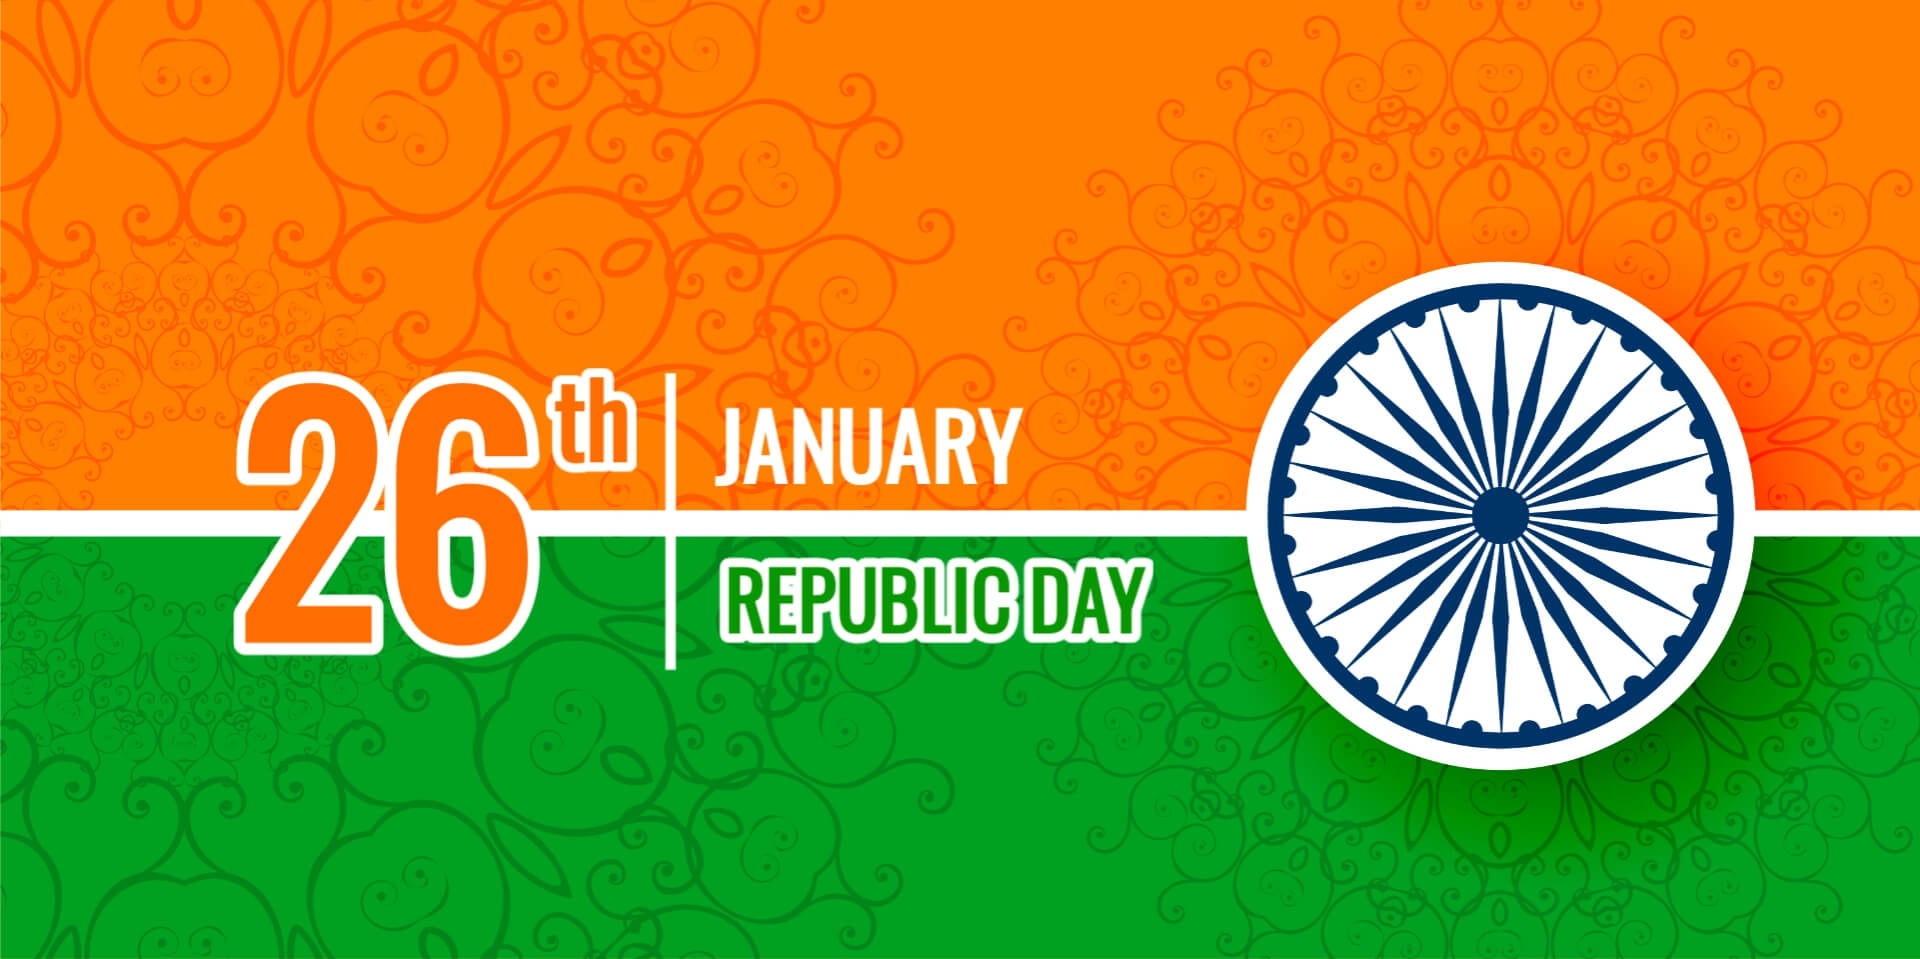 republic-day-images-1